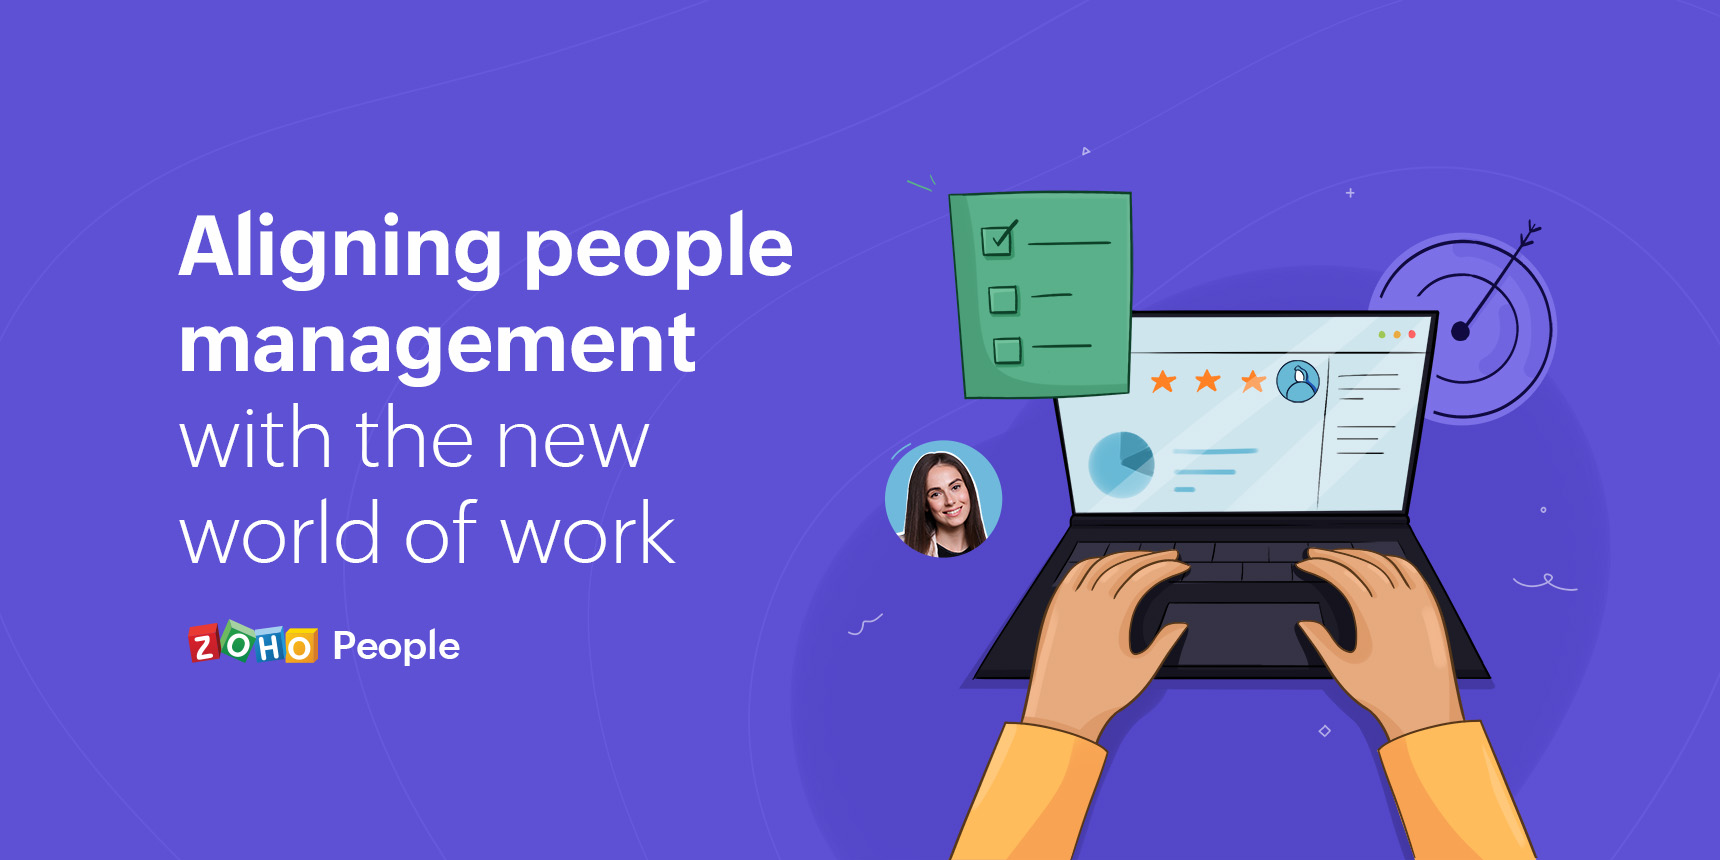 6 tips to align people management with the new world of work